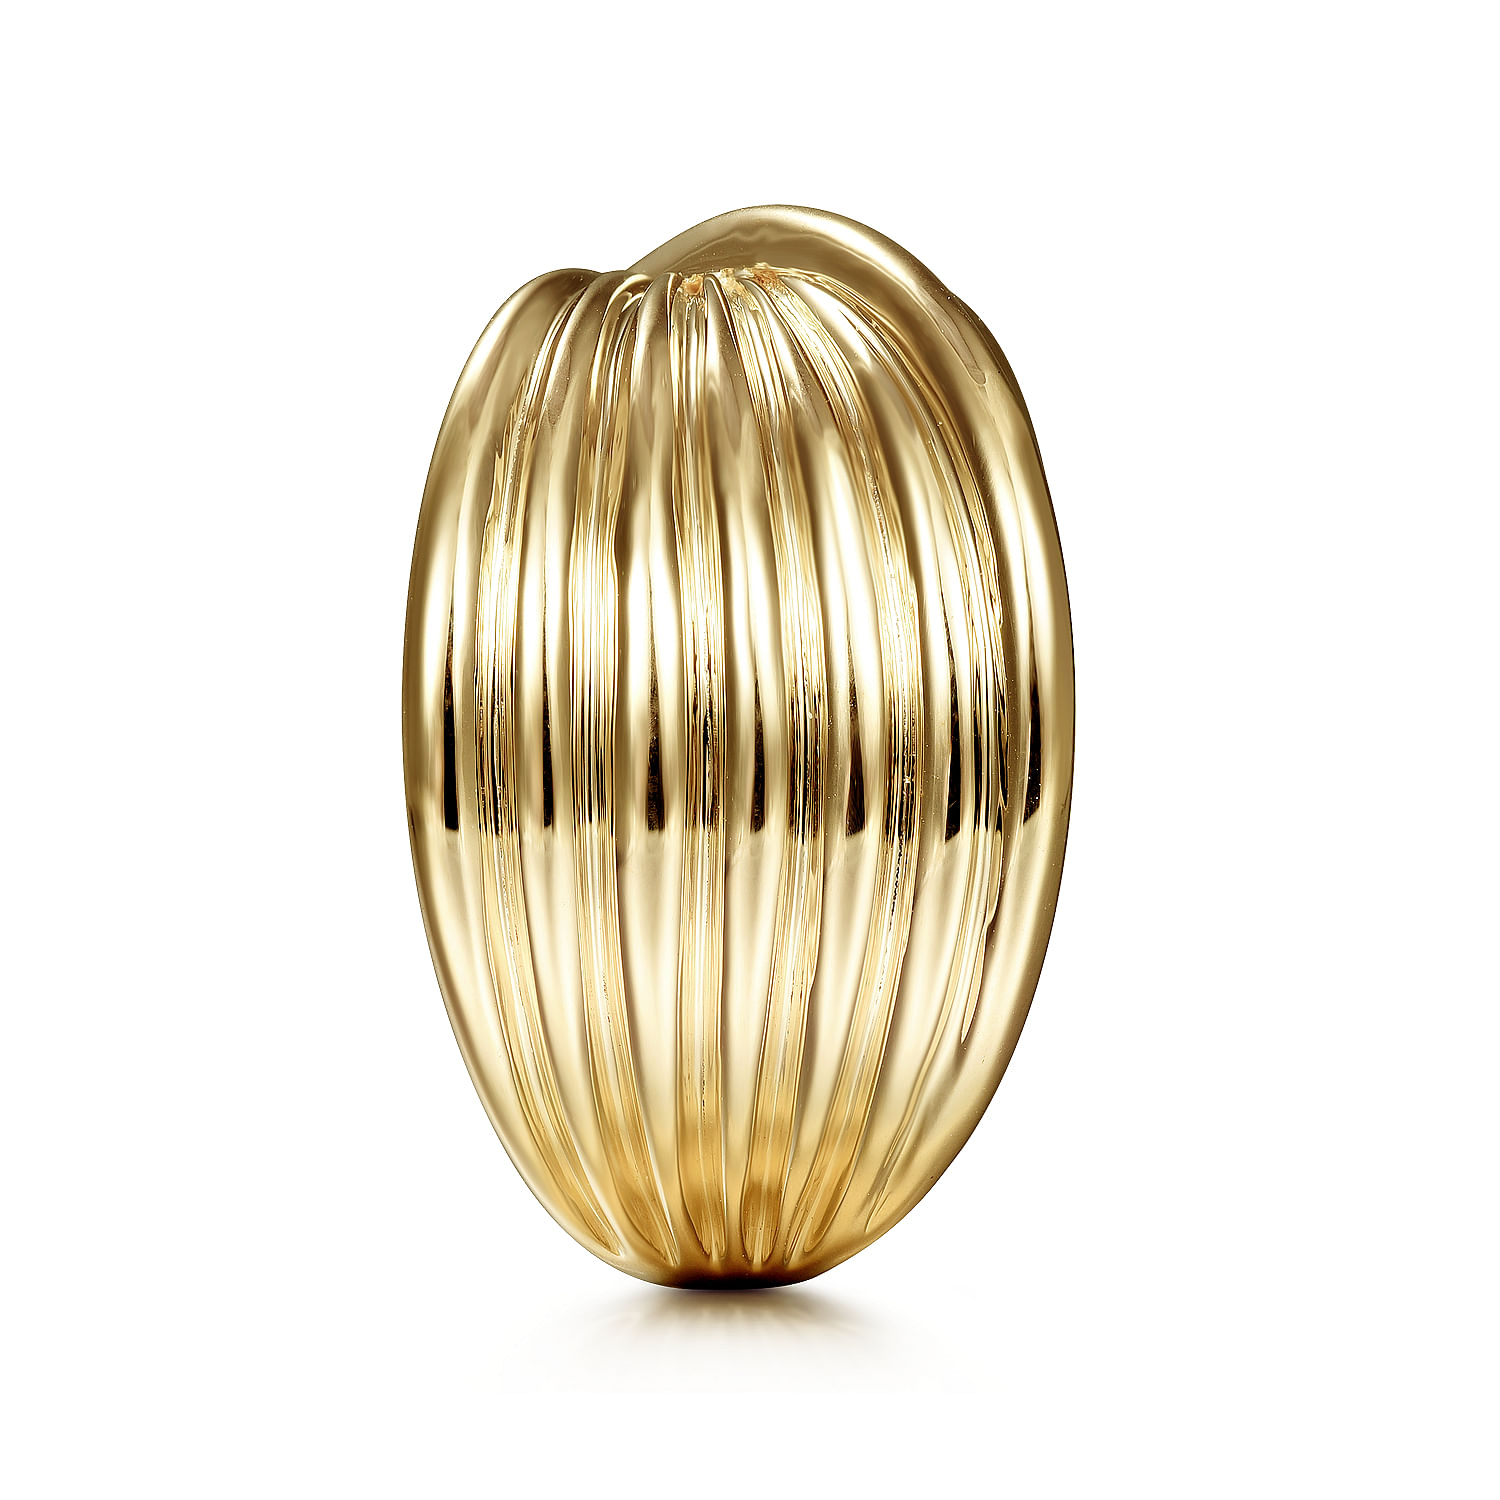 14K Yellow Gold Textured Rows Twist Ring